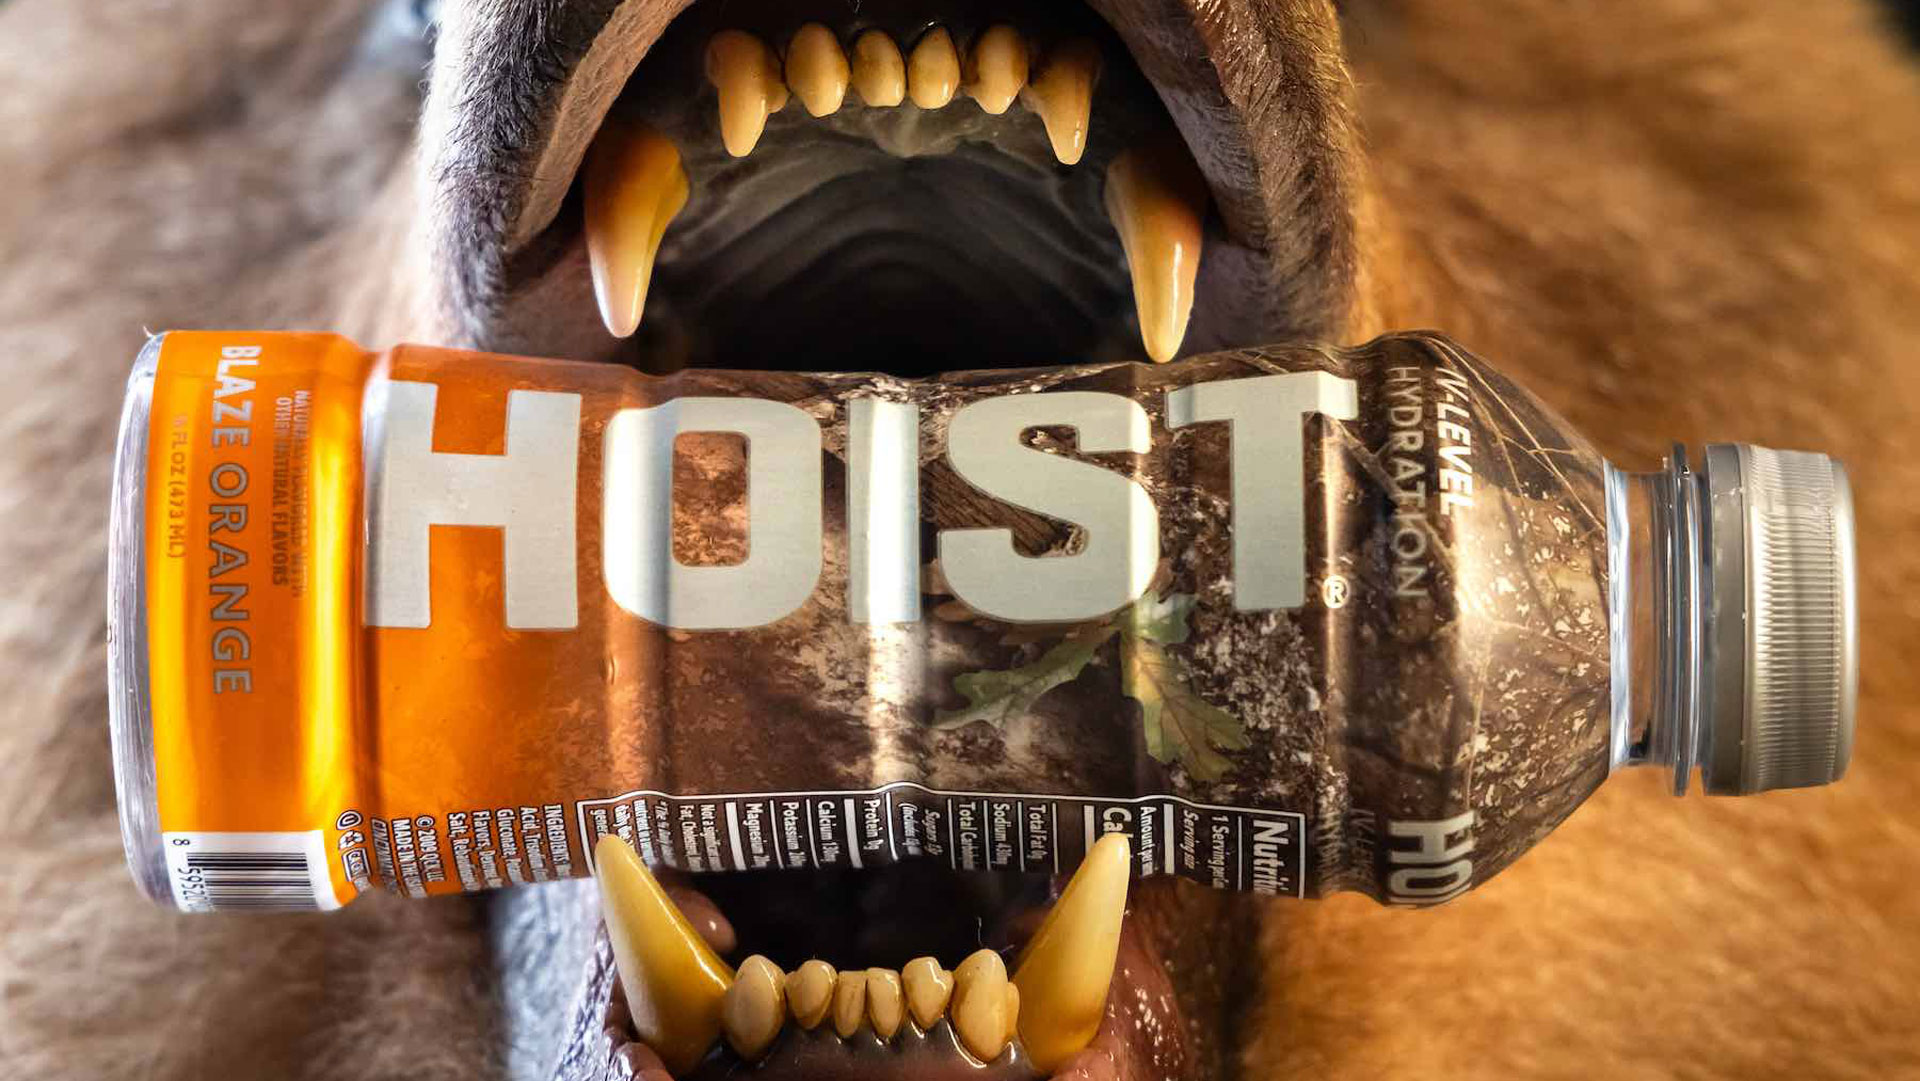 HOIST IV-Level Hydration Collaborates with Realtree for Blaze Orange Flavor  - NRA Women